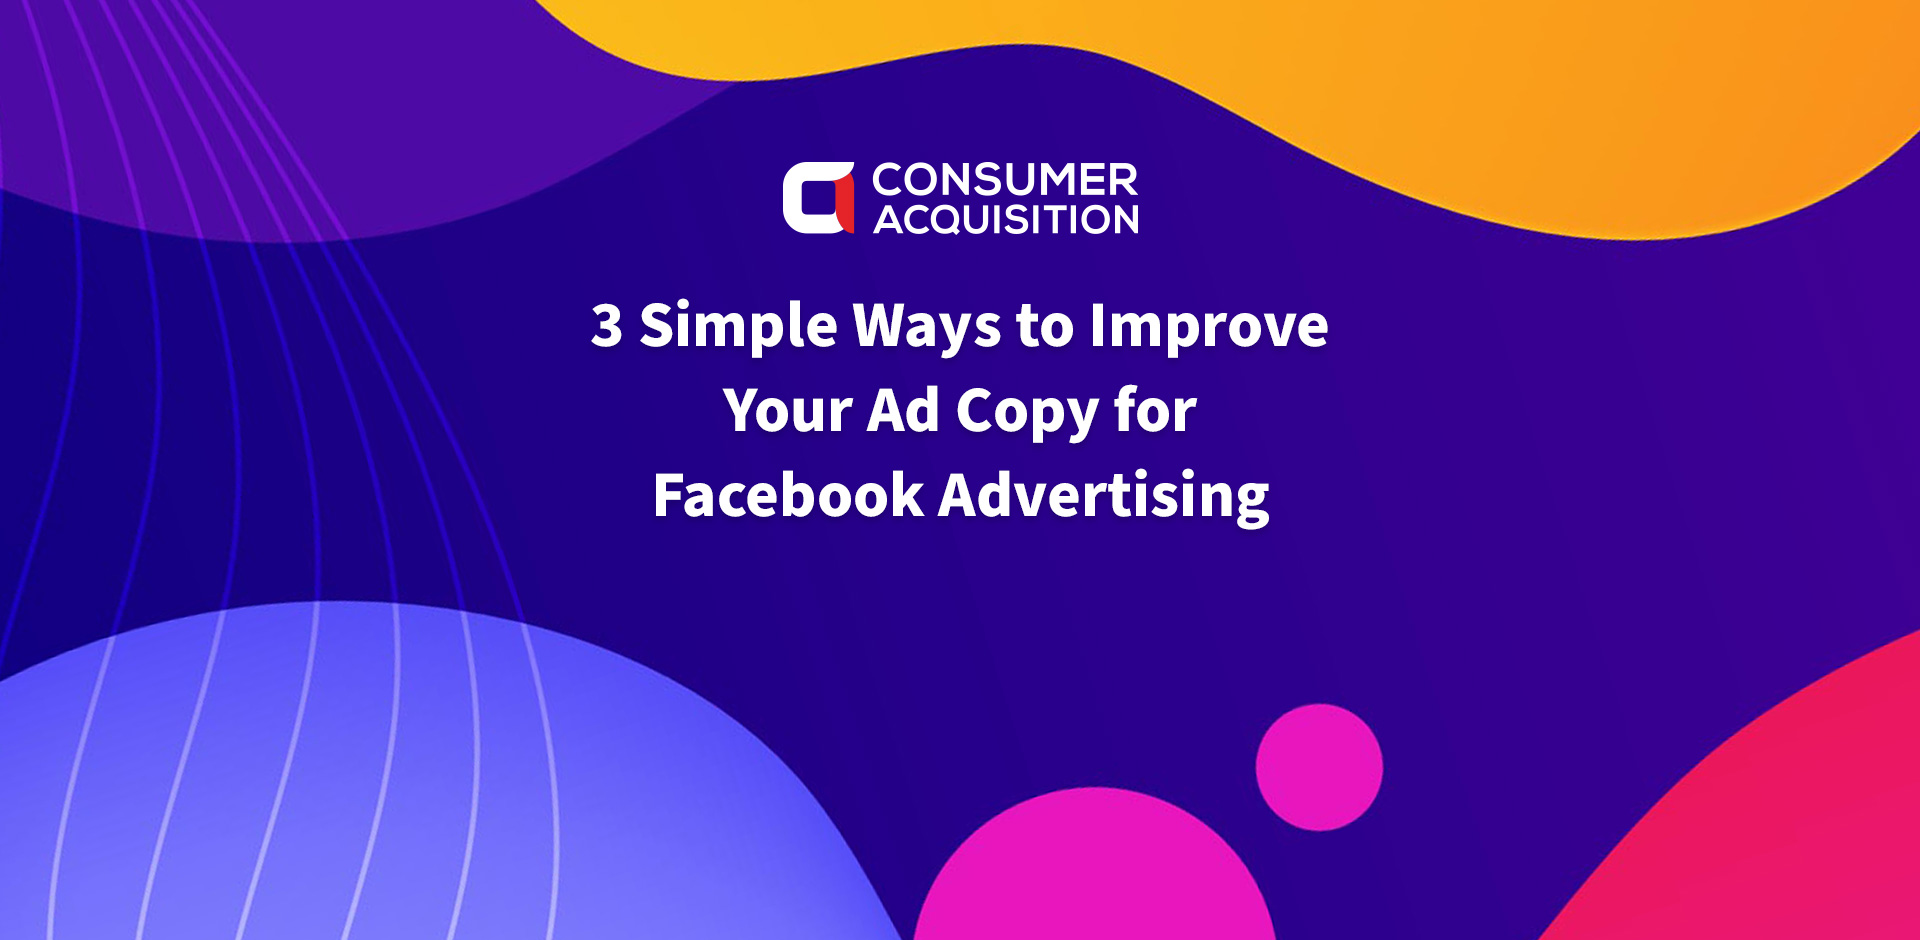 3 Simple Ways to Improve Your Ad Copy for Facebook Advertising